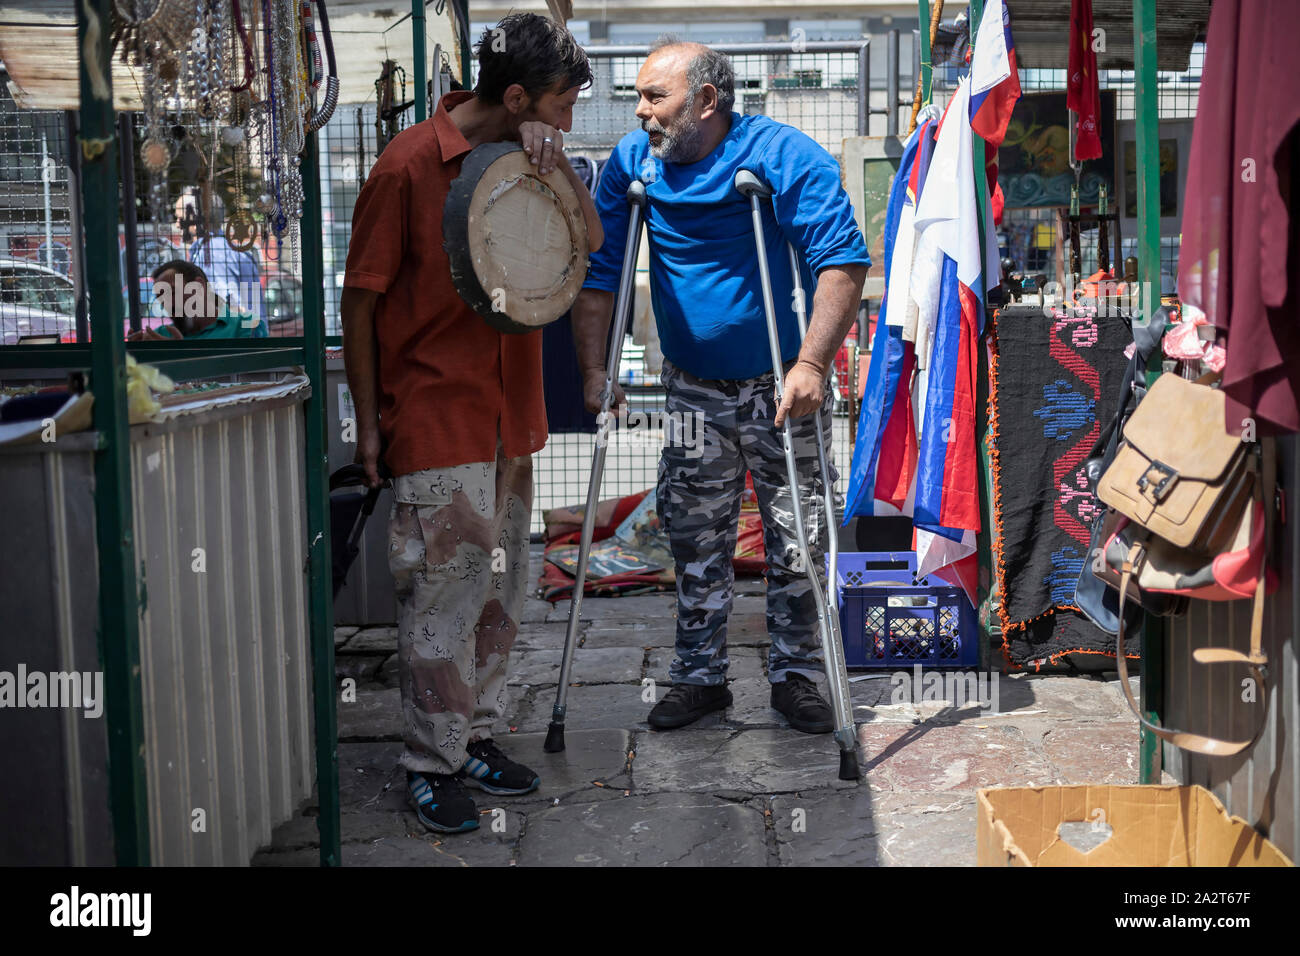 Belgrade, Serbia, Aug 15, 2019: Two gypsy men standing and having a conversation at a flea market section of Kalenić Green Market Stock Photo